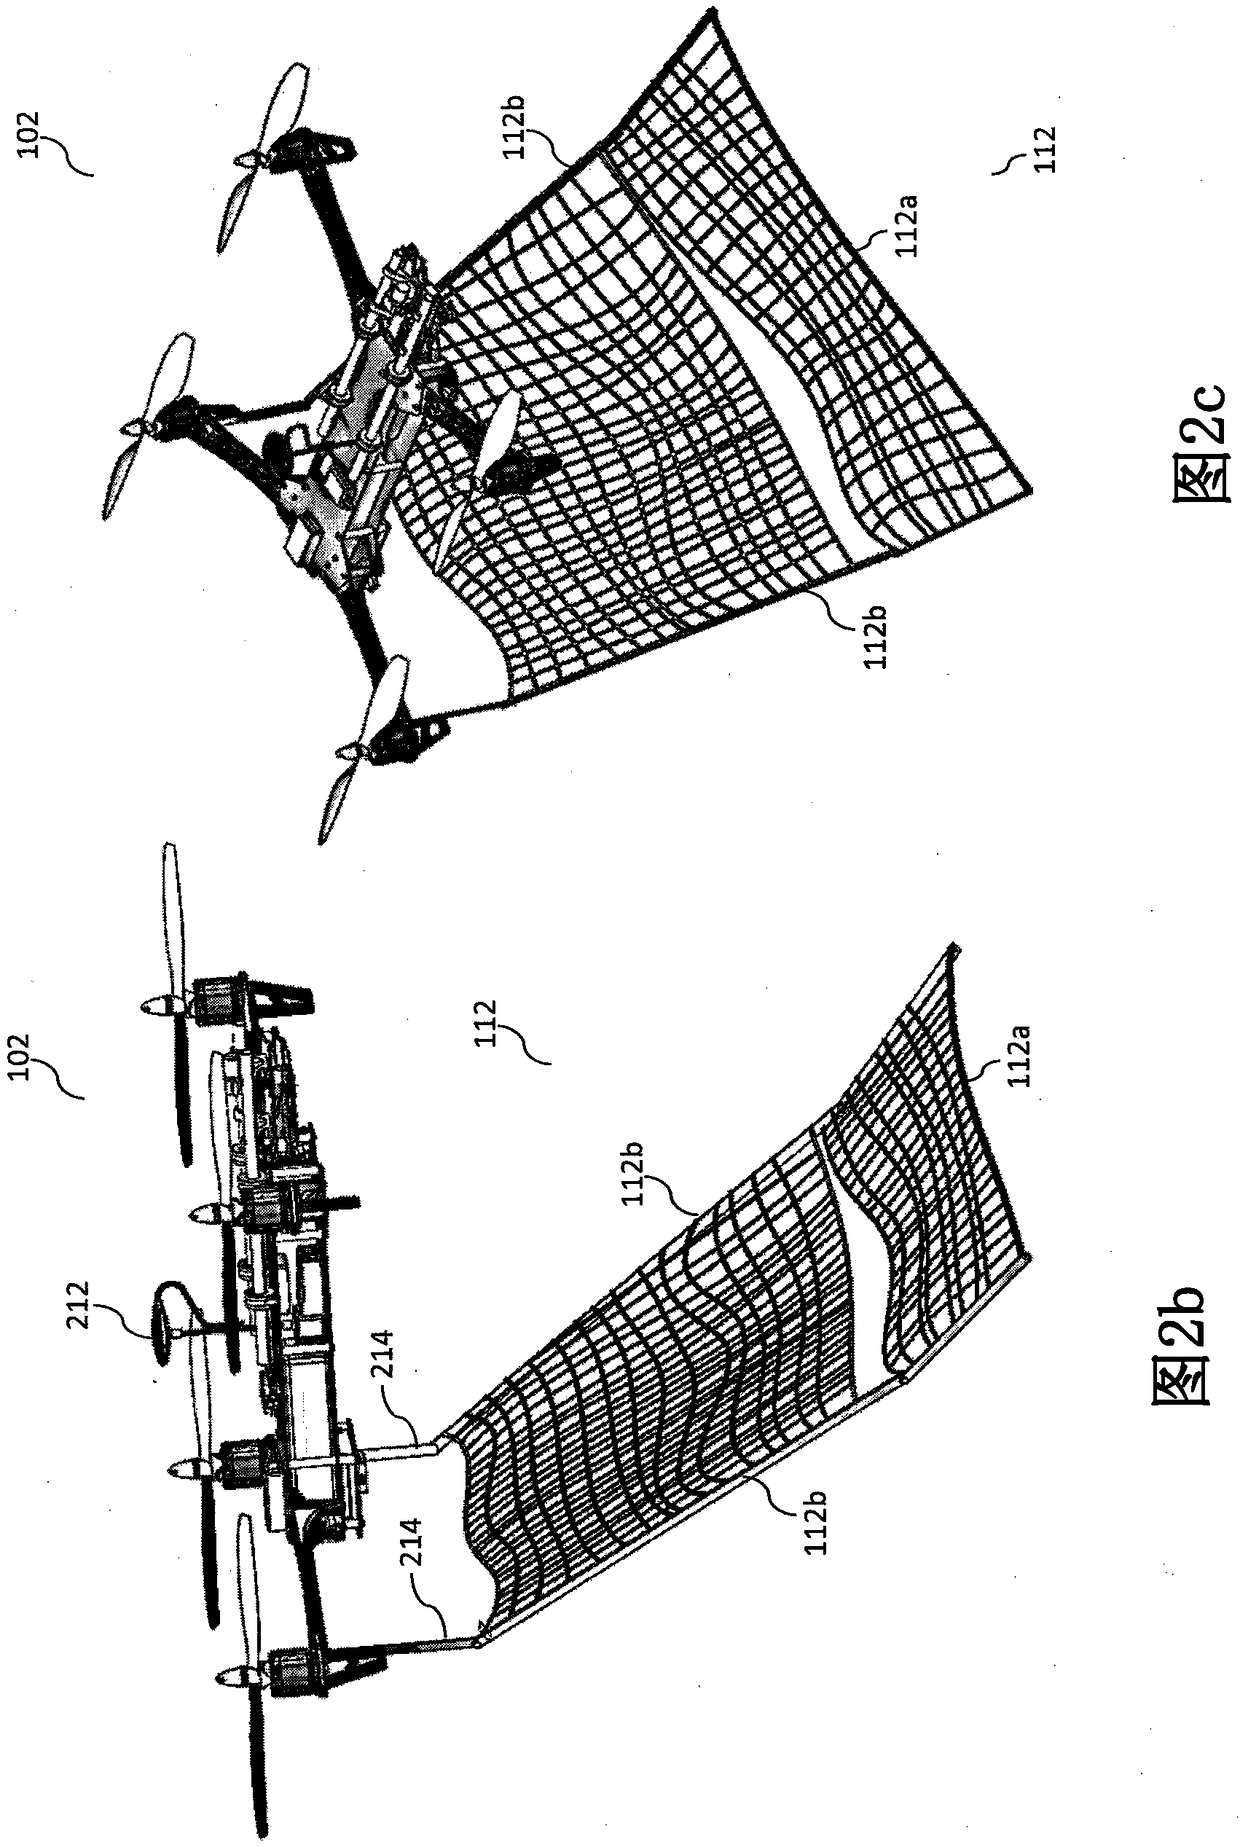 Aerial vehicle imaging and targeting system